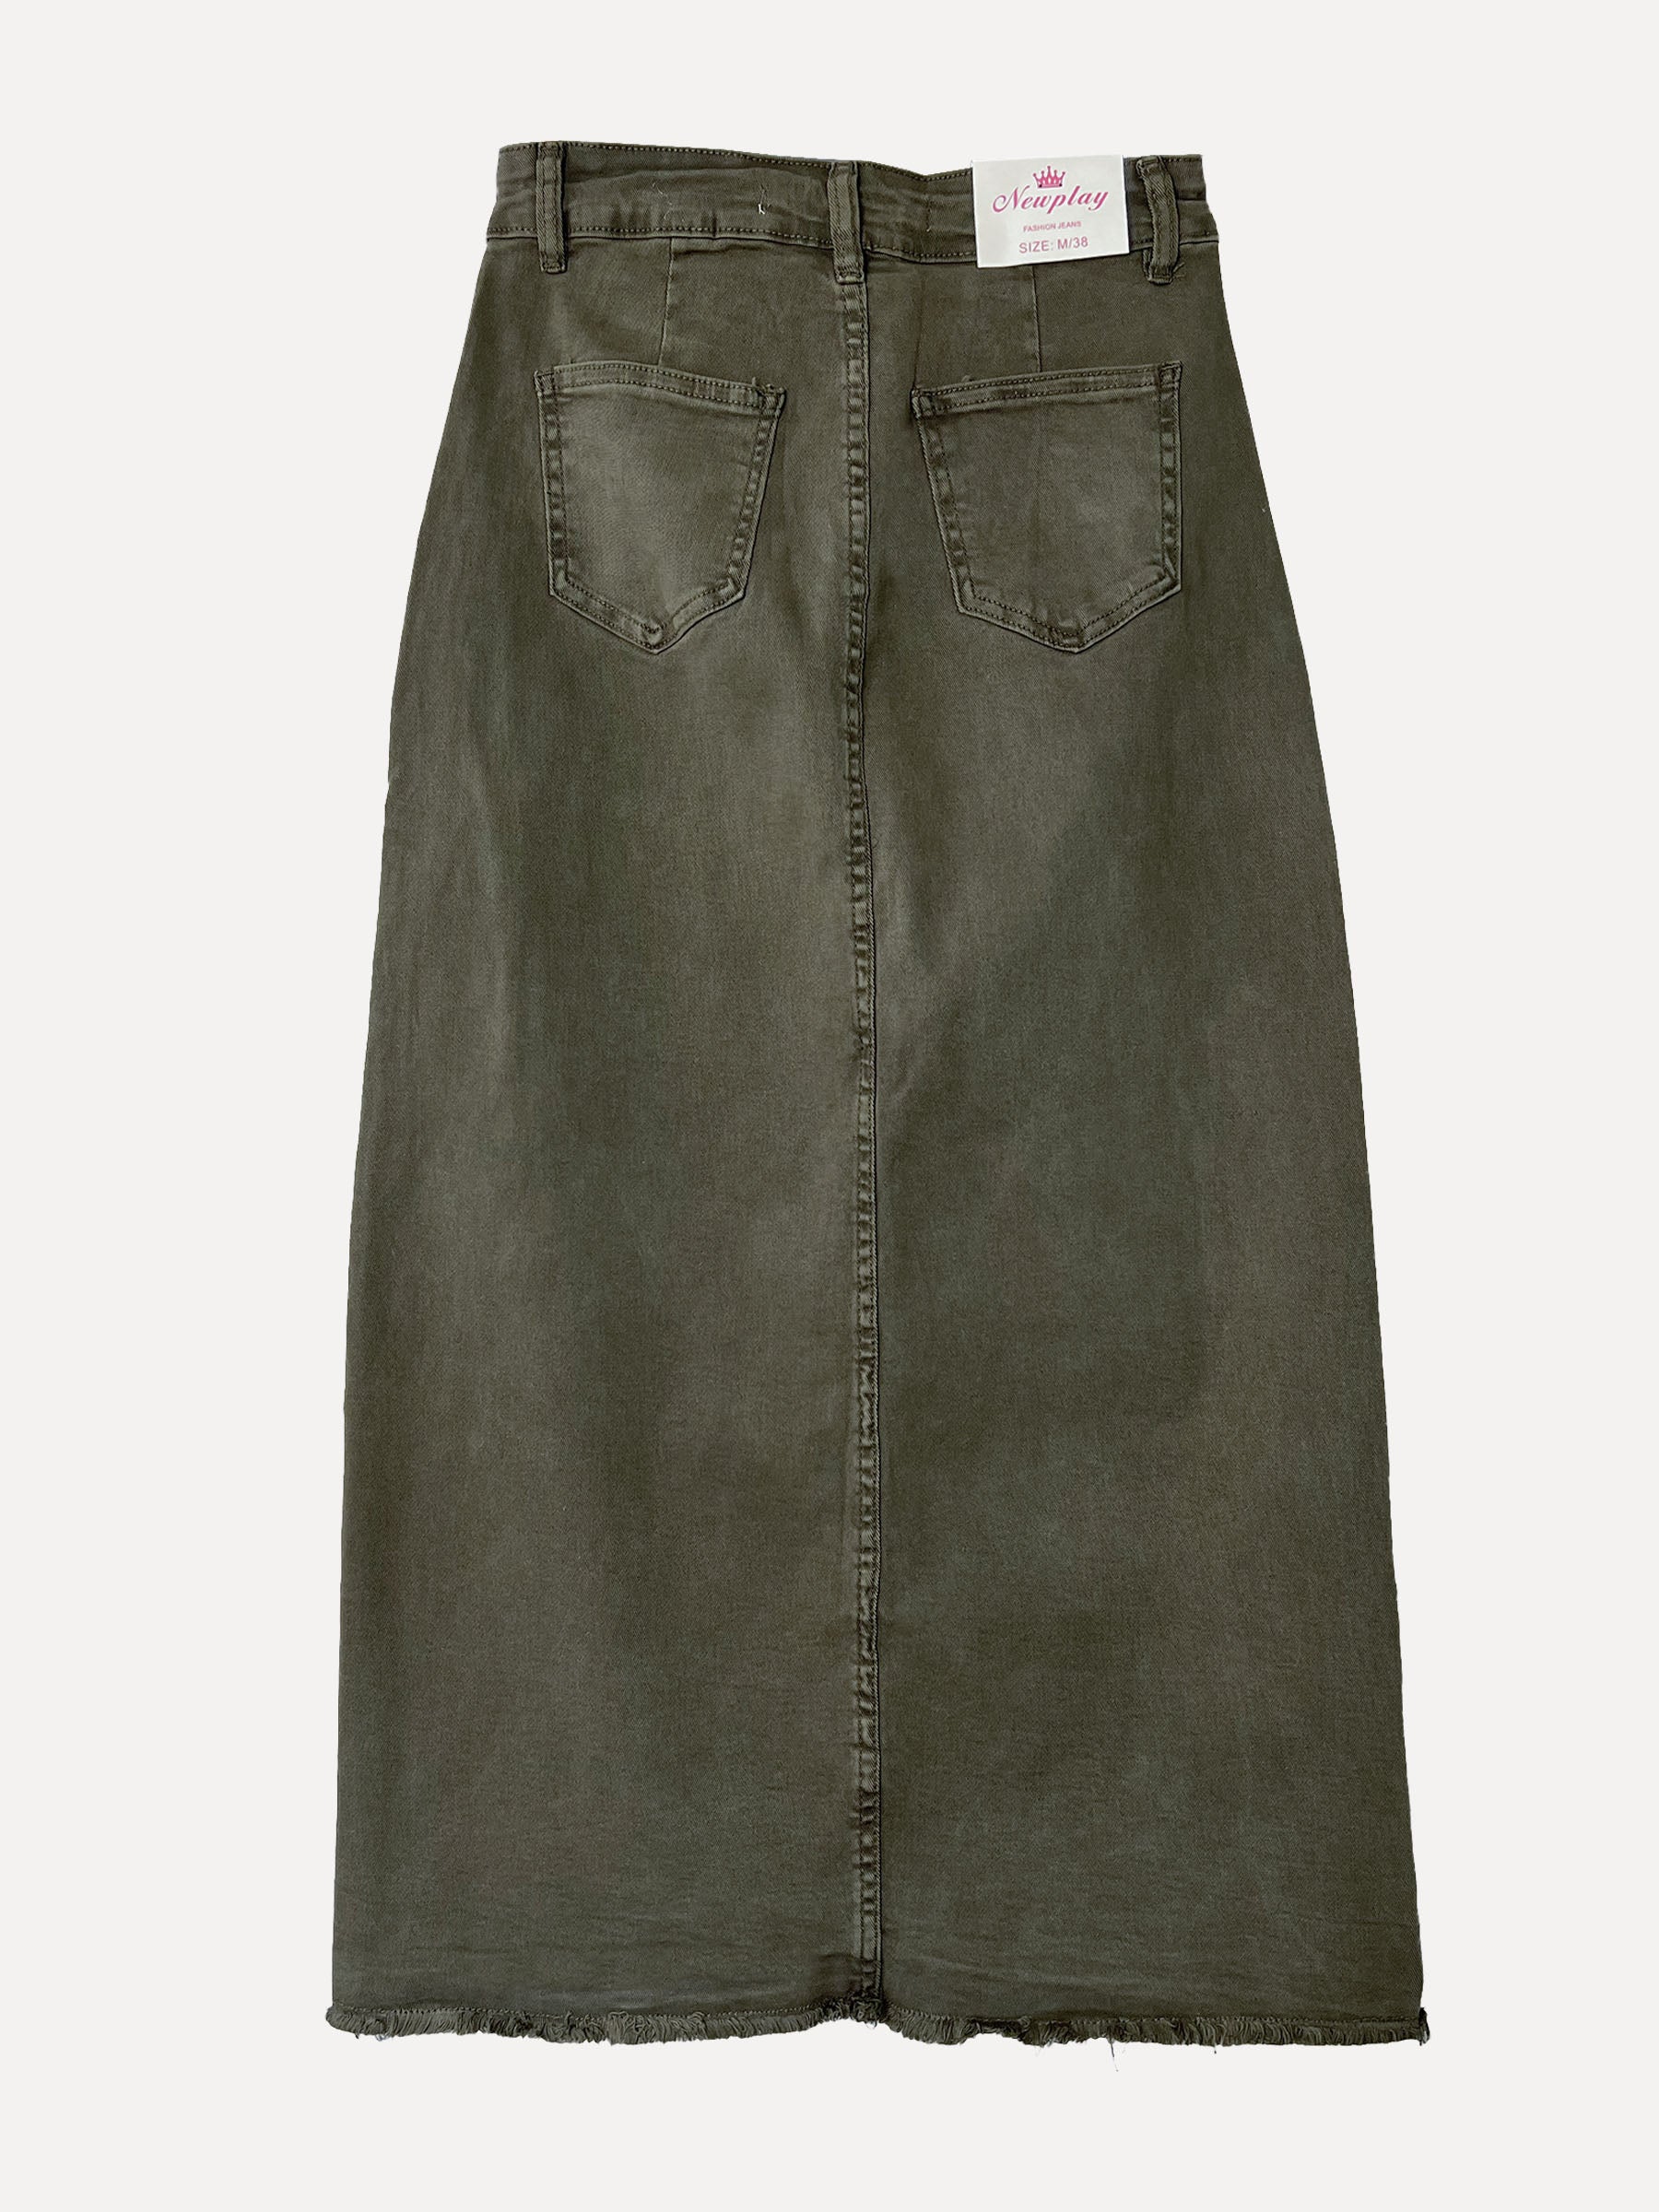 Jeans Skirt F6876-Forest Green